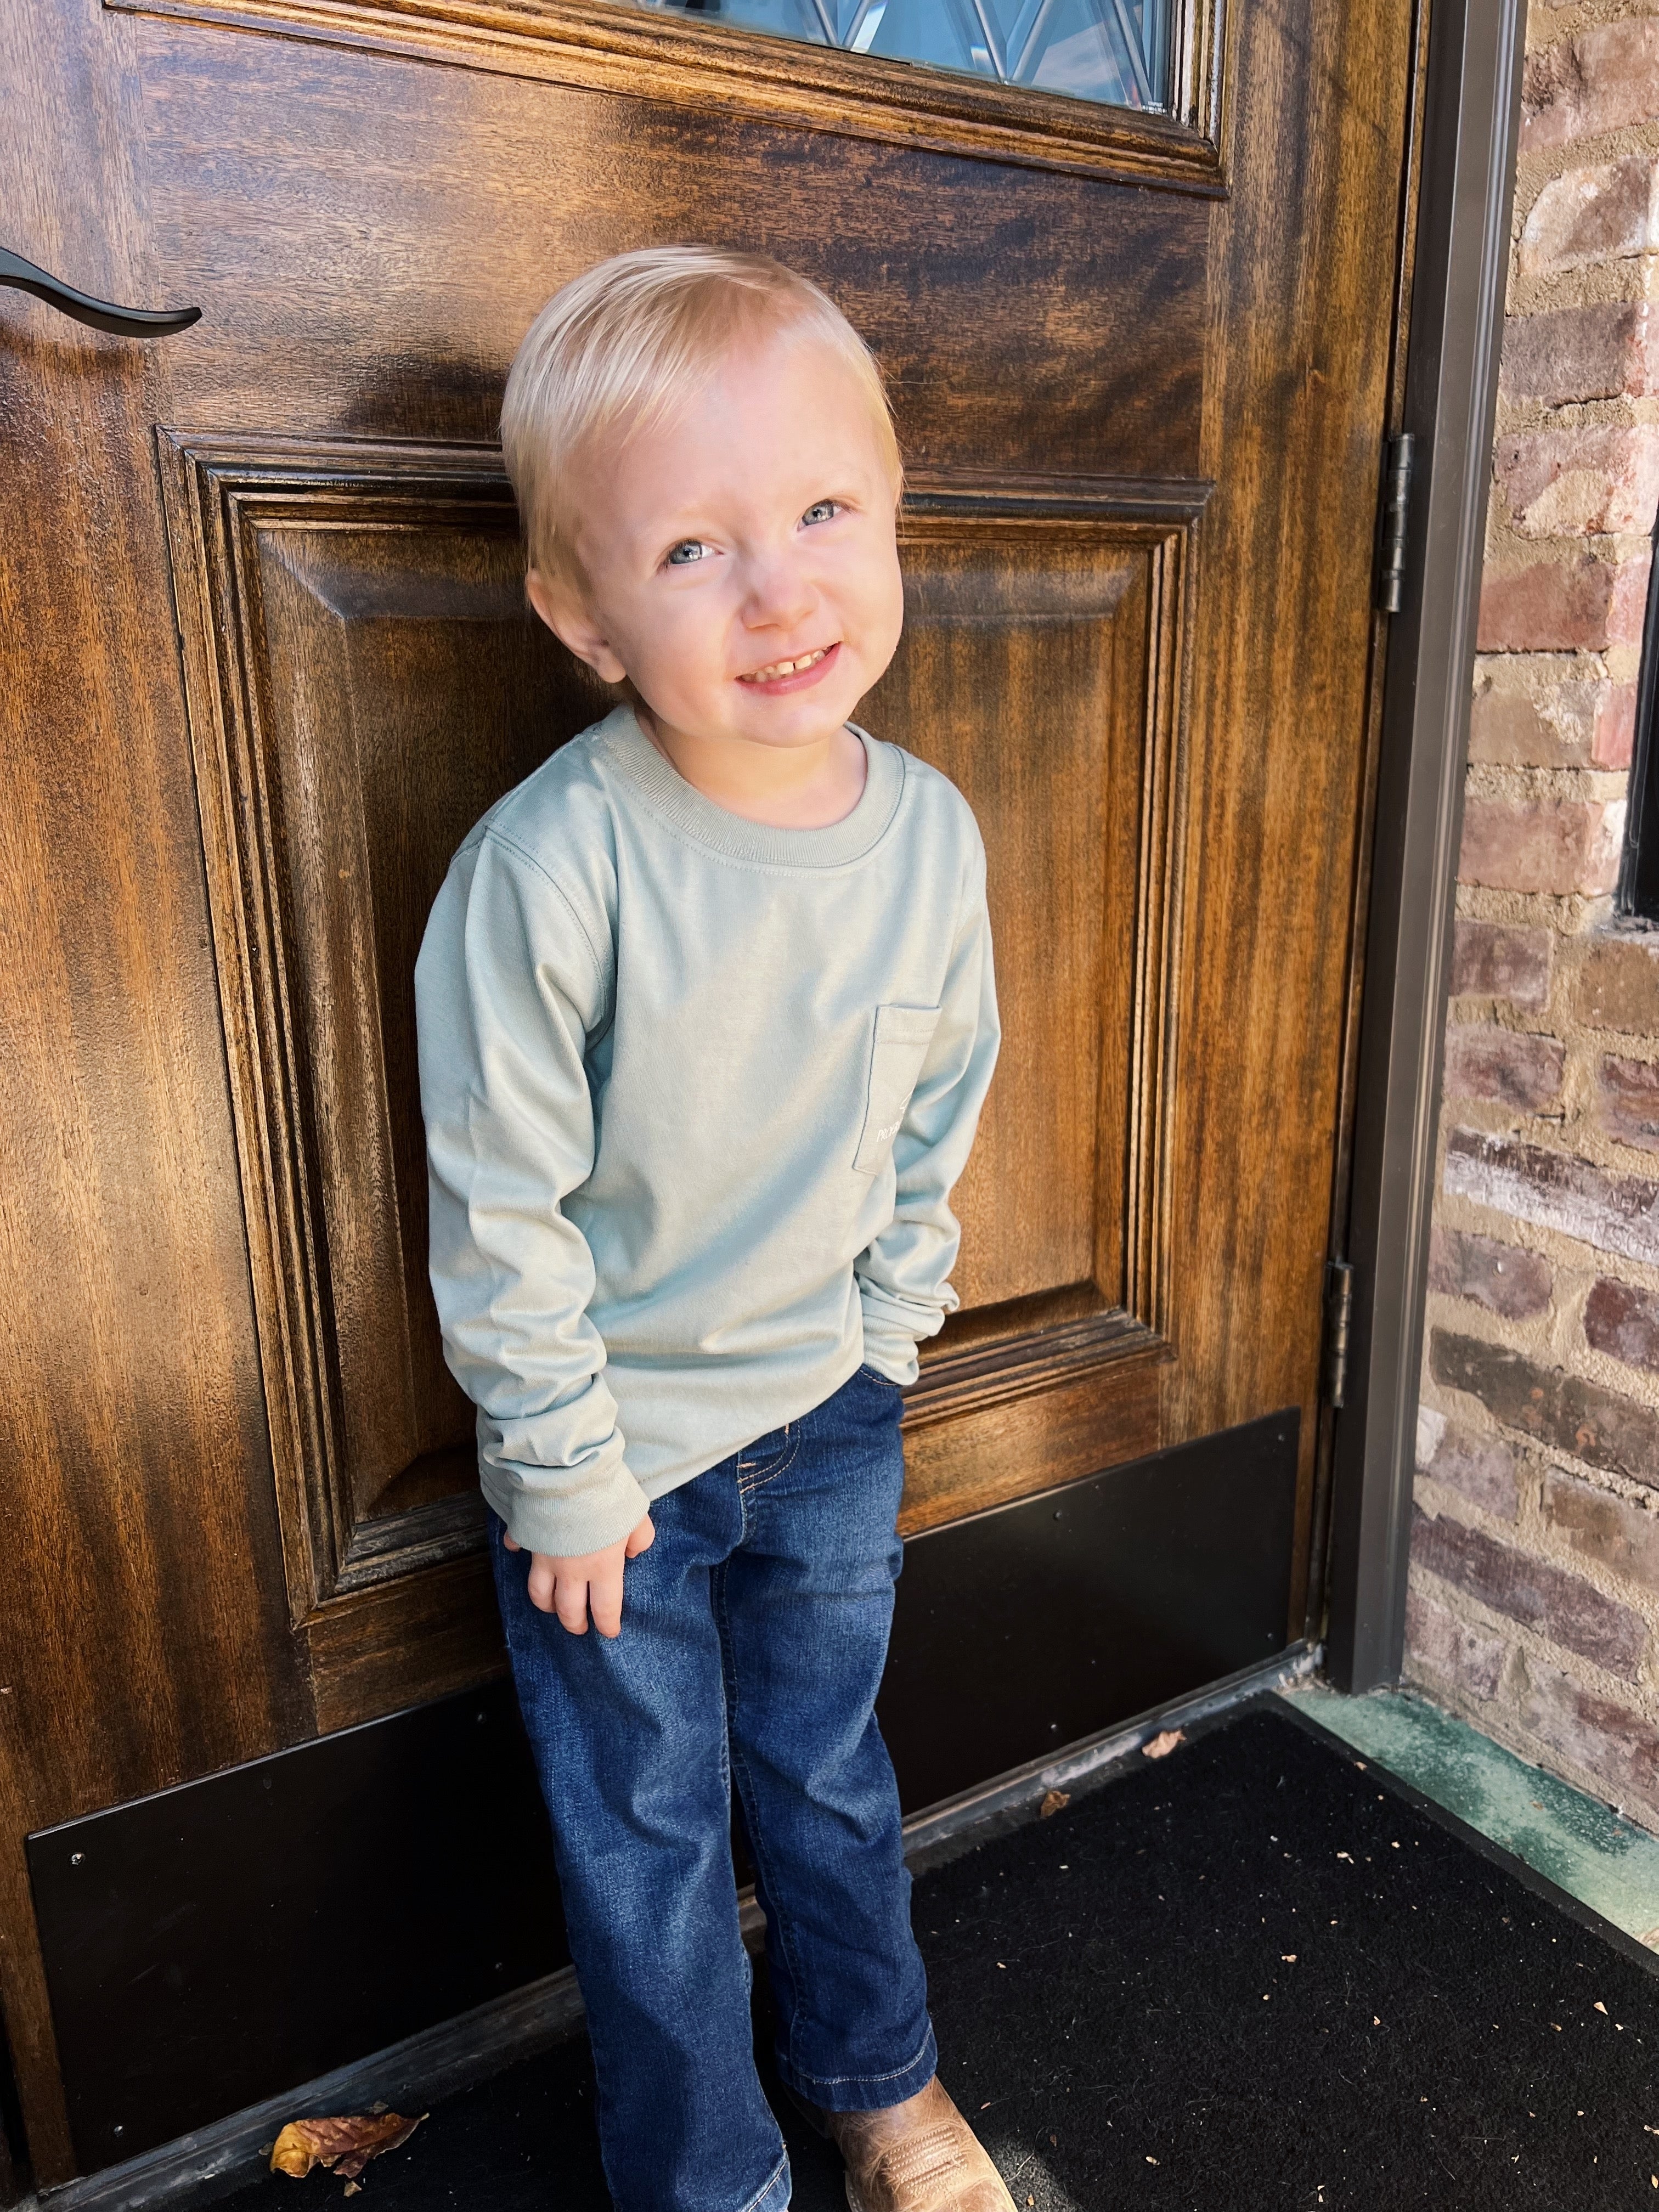 Image of a cute kid wearing a sweatshirt and jeans.